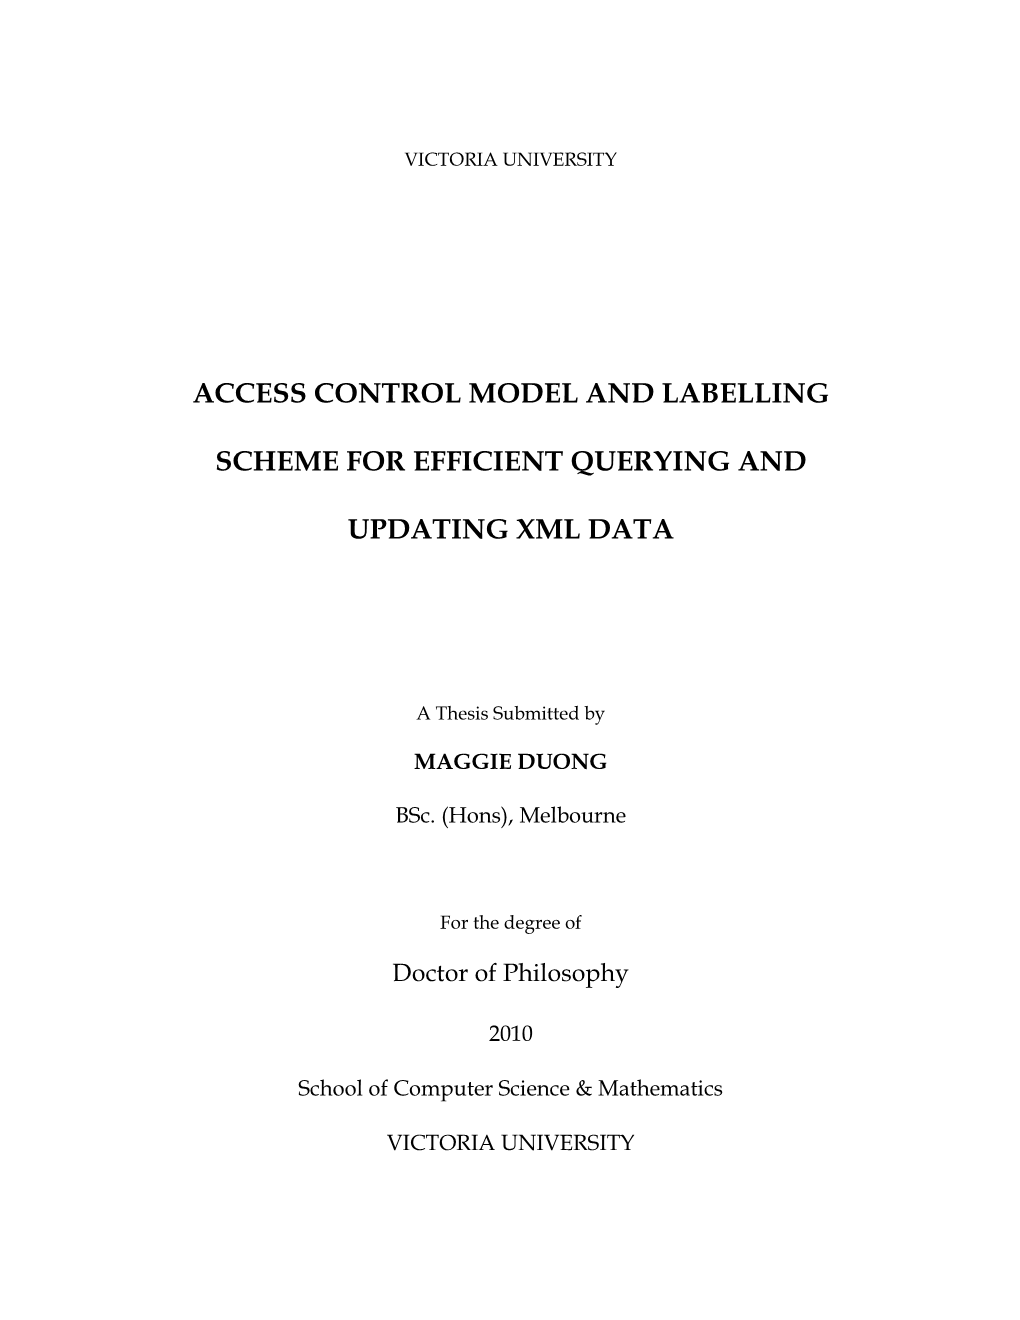 Access Control Model and Labelling Scheme for Efficient Querying And